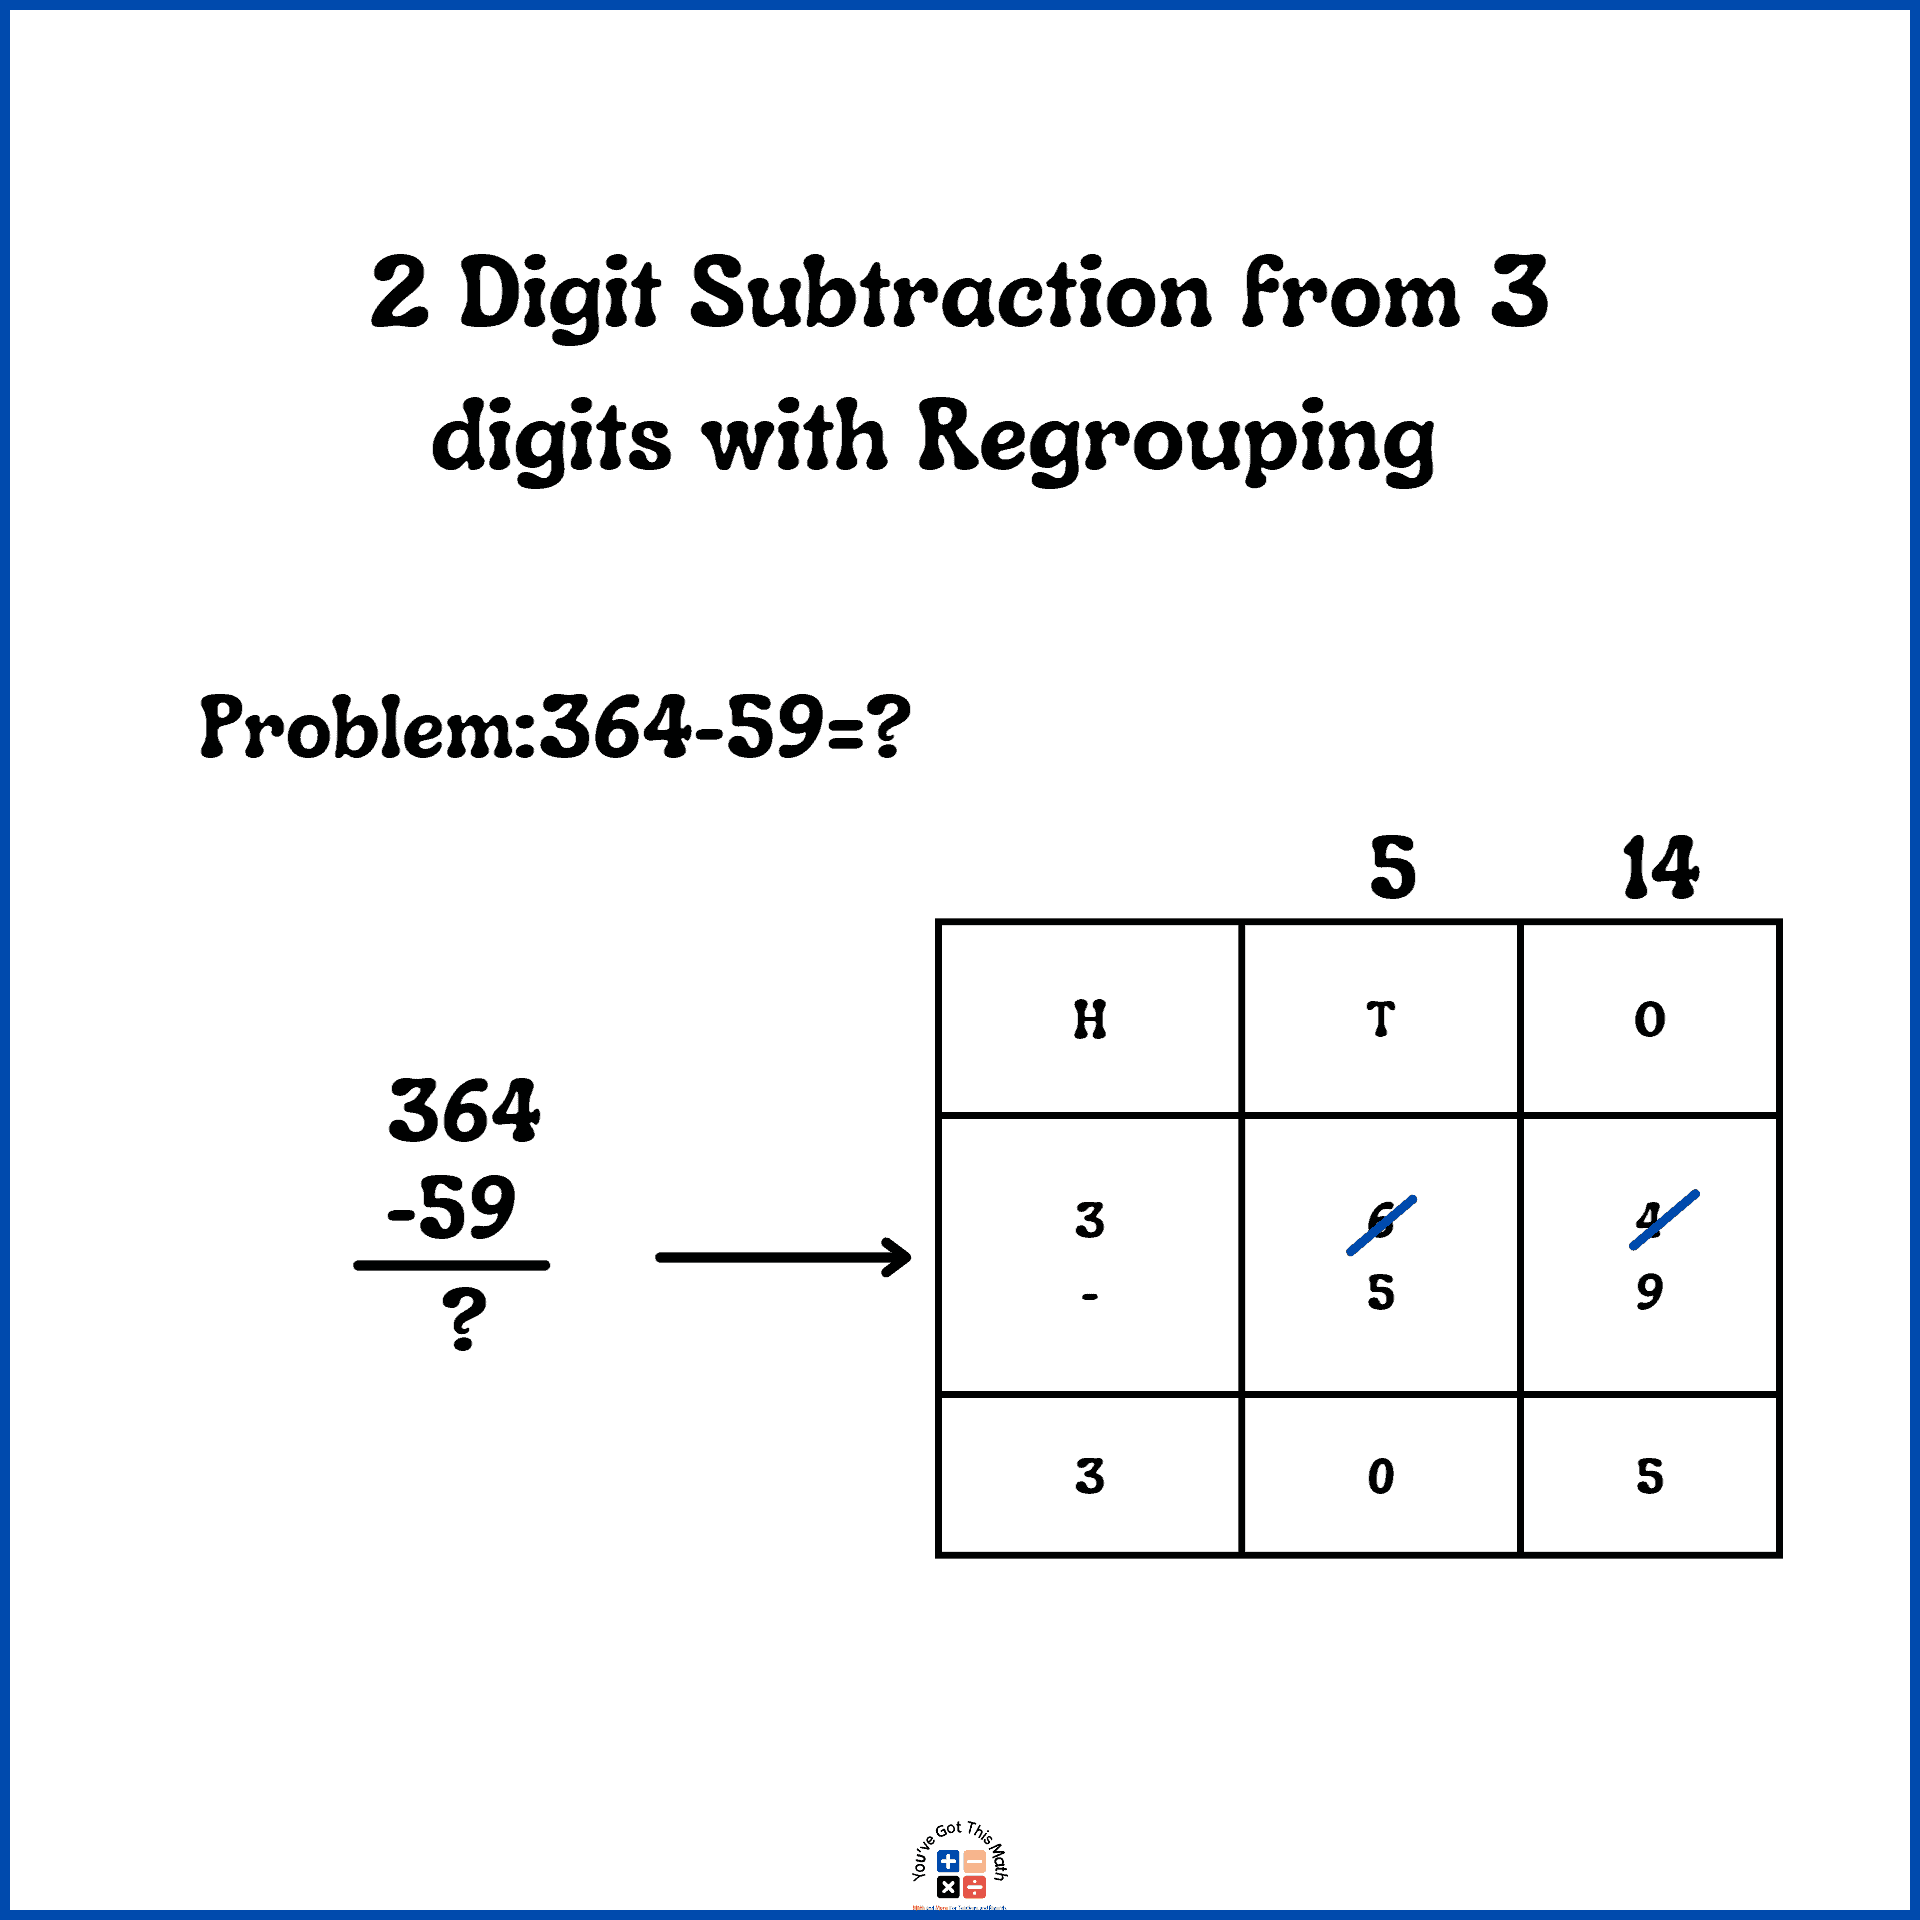 2 digit subtraction from 3 digits with regrouping